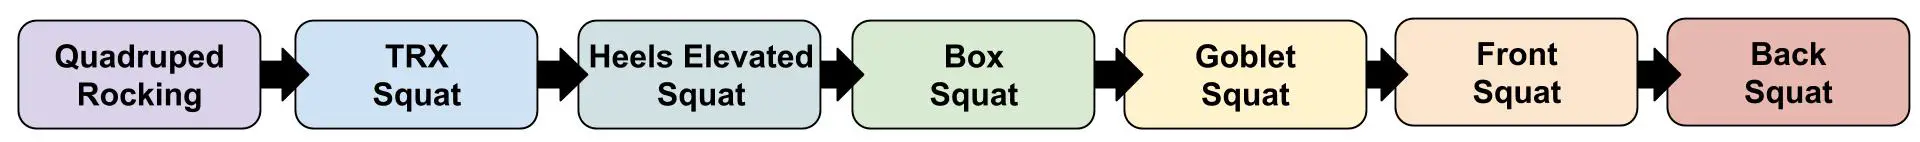 Example Squat Progression = Unloaded > Assisted > Unassisted > Loaded